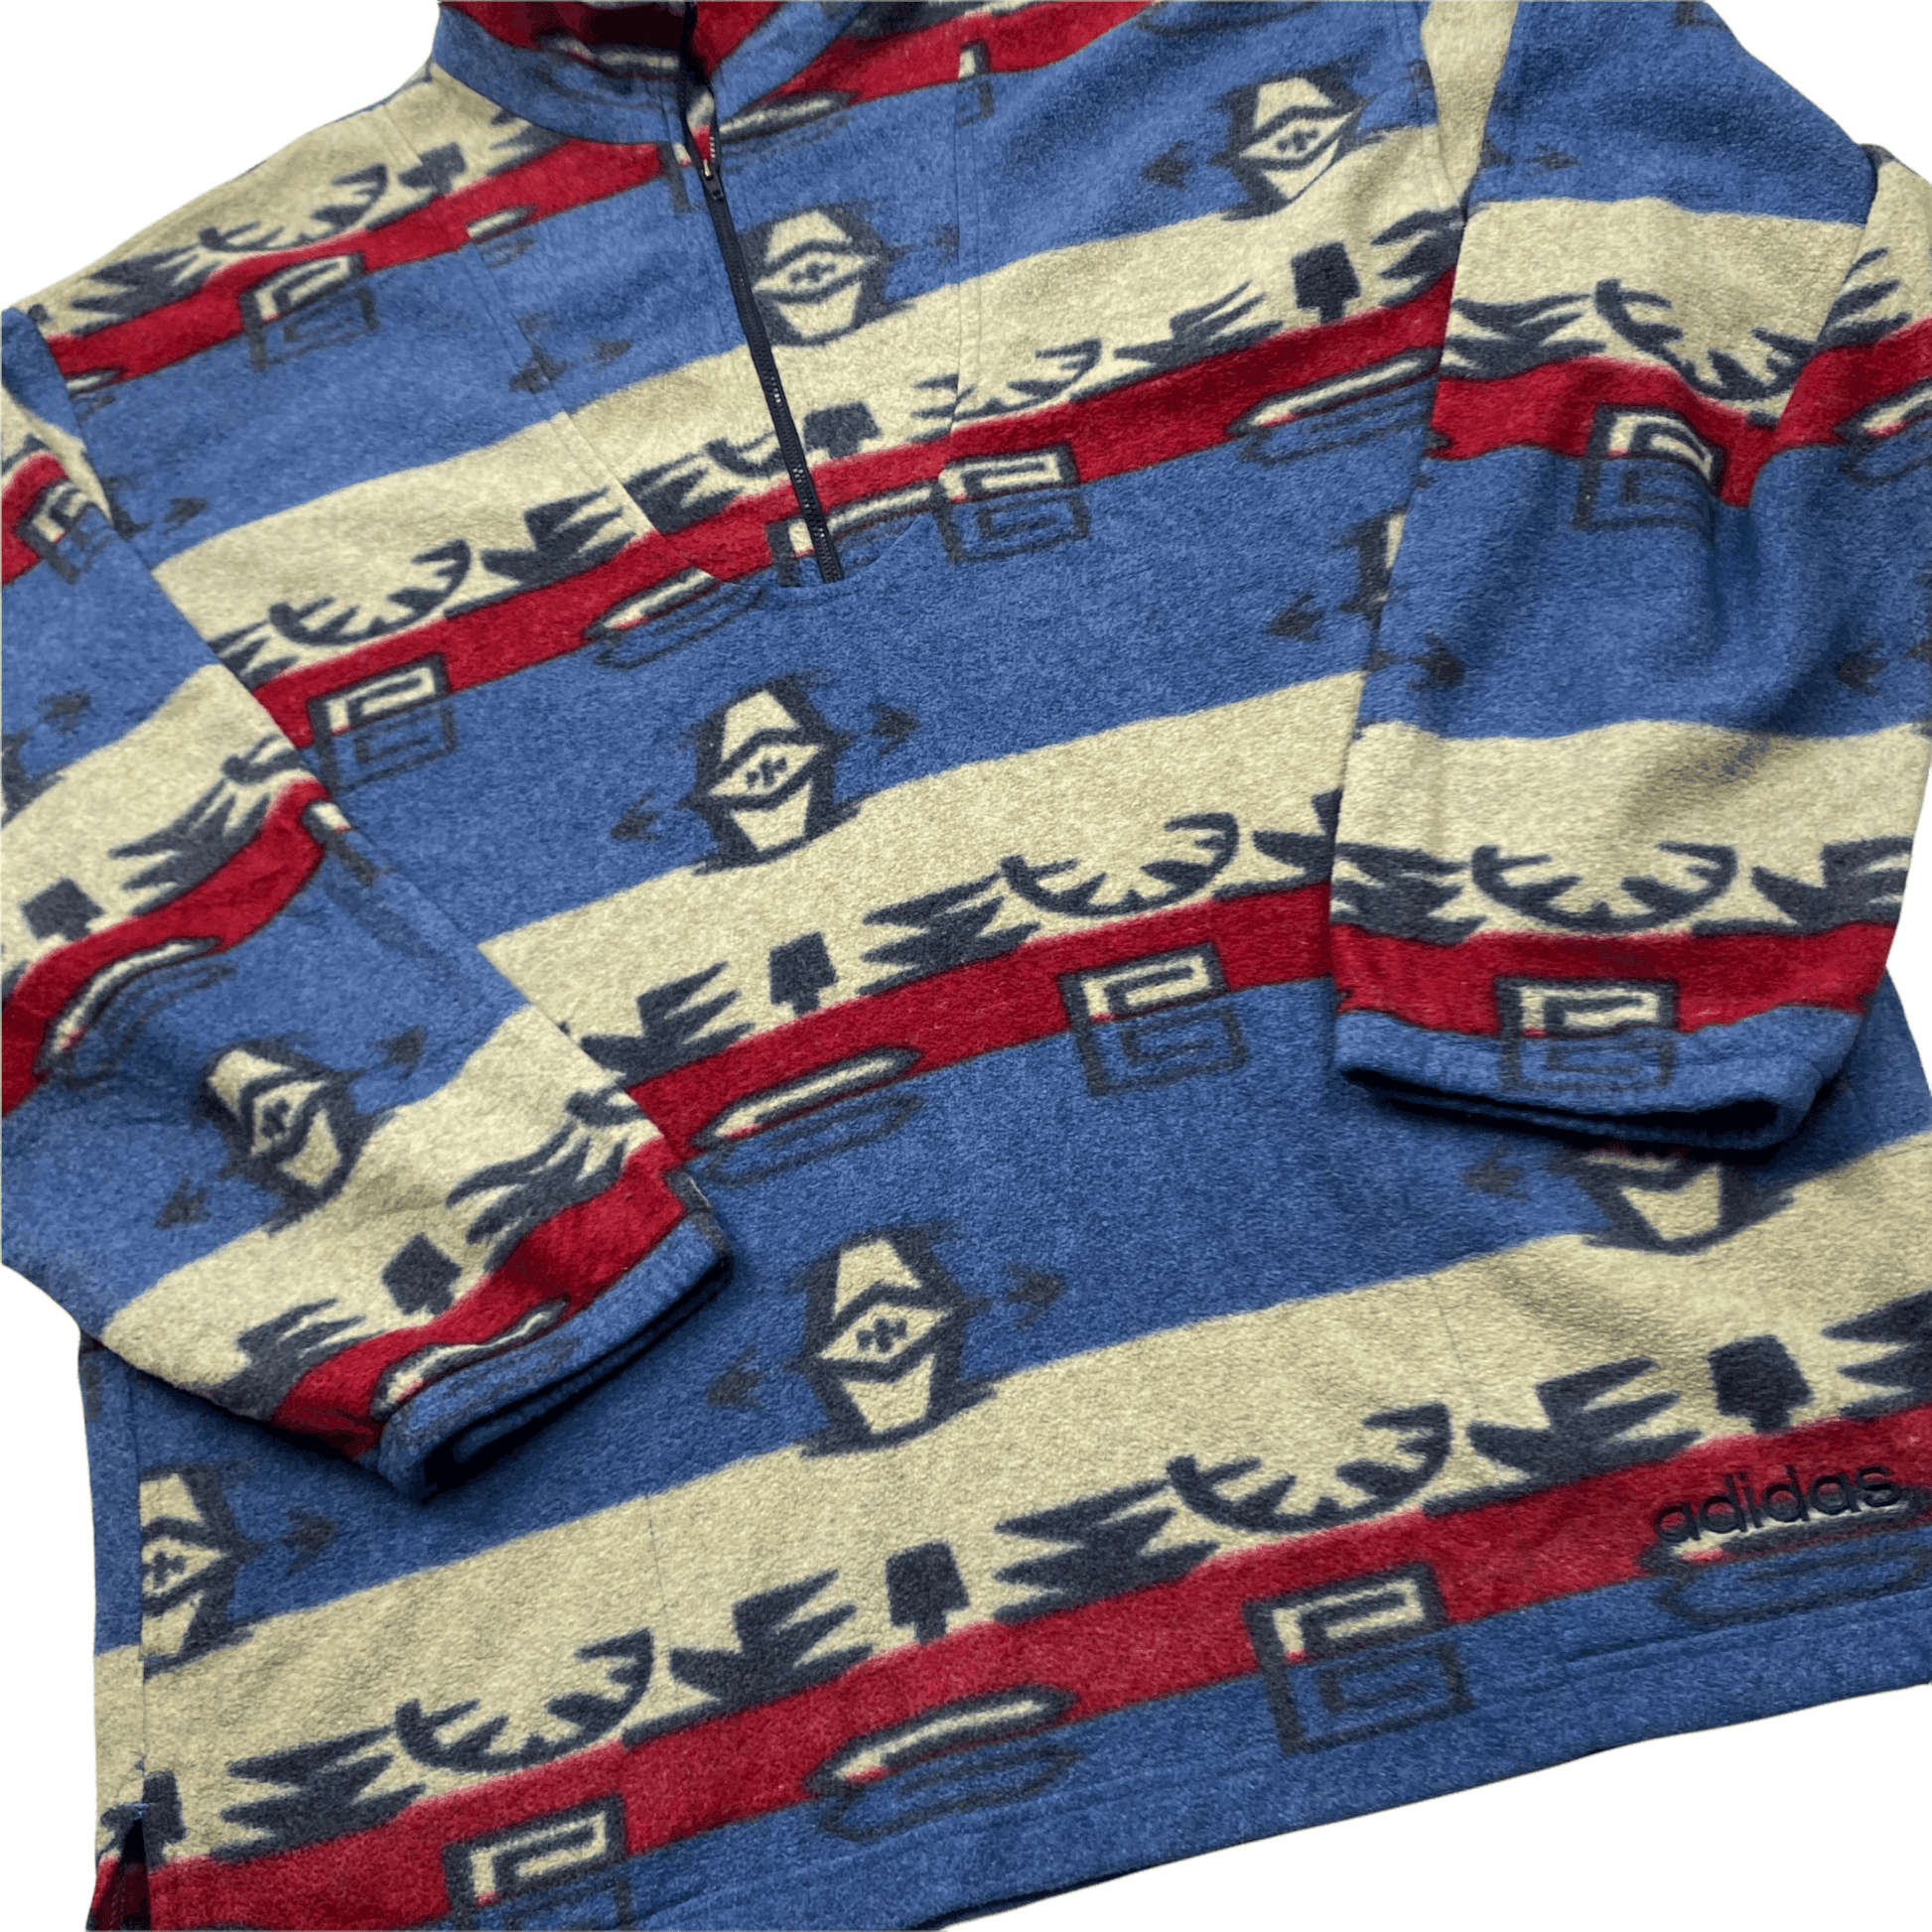 Vintage 90s Adidas Spell-Out Quarter Zip Crazy Pattern Fleece - Extra Large - The Streetwear Studio